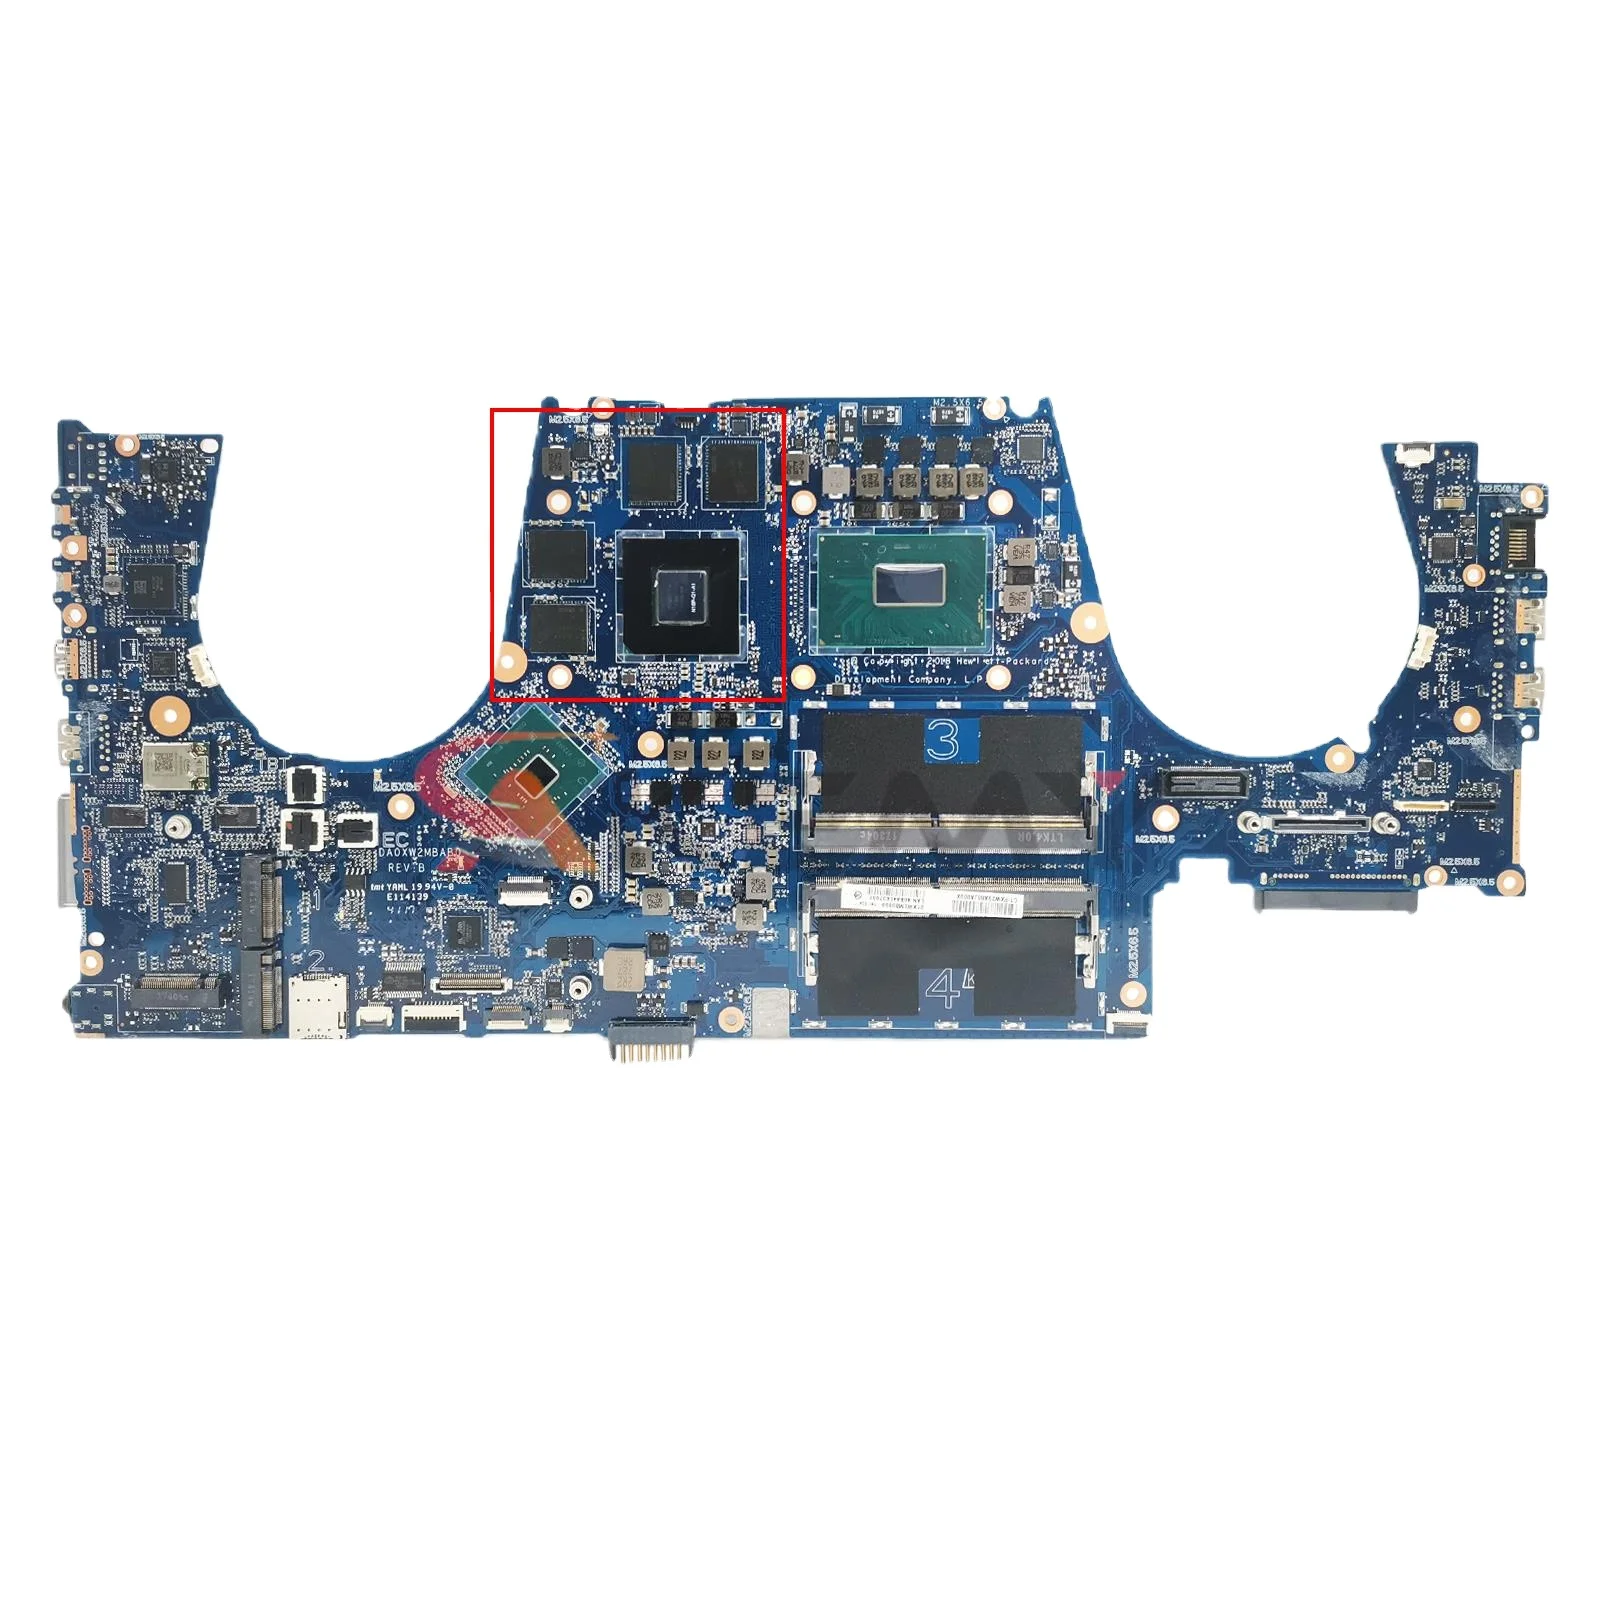 

For HP ZBOOK 15 G5 Motherboard Mainboard DA0XW2MBAB0 DAXW2CMBAF0 motherboard I5 I7 8th Gen E-2176M CPU with GPU